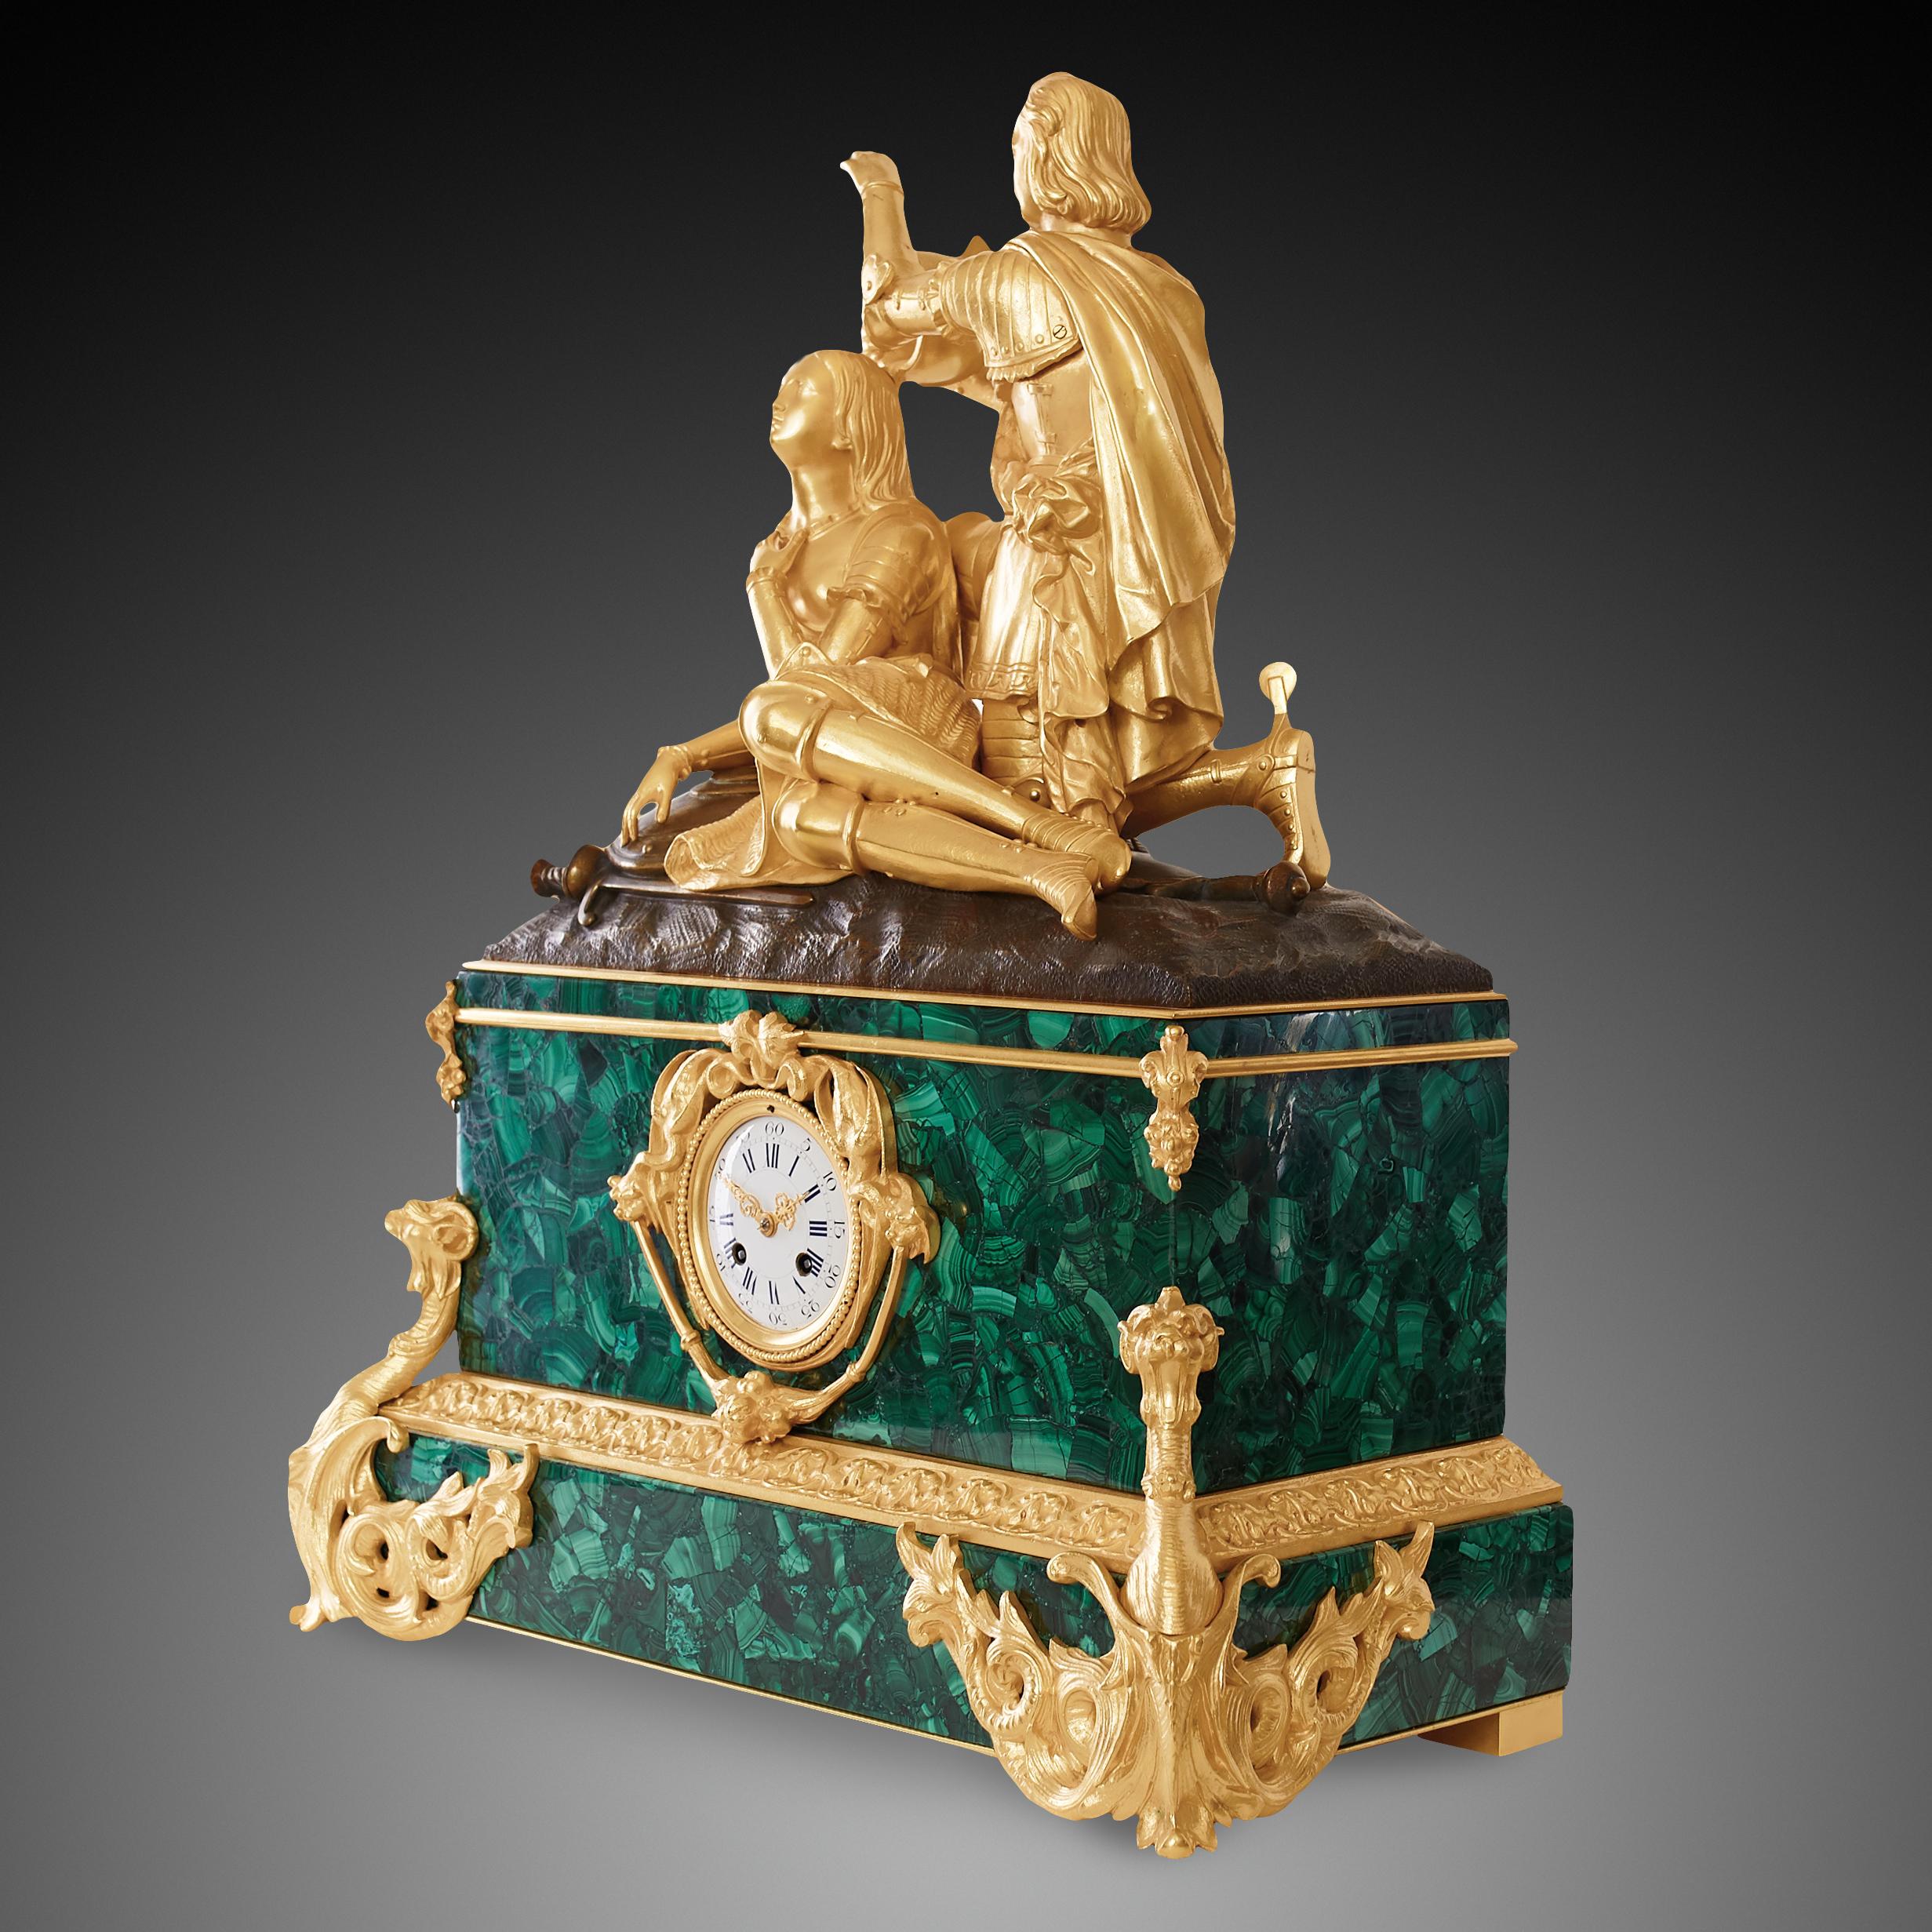 This mantel clock is crafted in a neoclassical style of the Napoleon III period (1824-1830). The mantel clock’s pedestal is made from turquoise malachite and golden ormolu. Malachit is well known for bringing the outstanding color but also for being